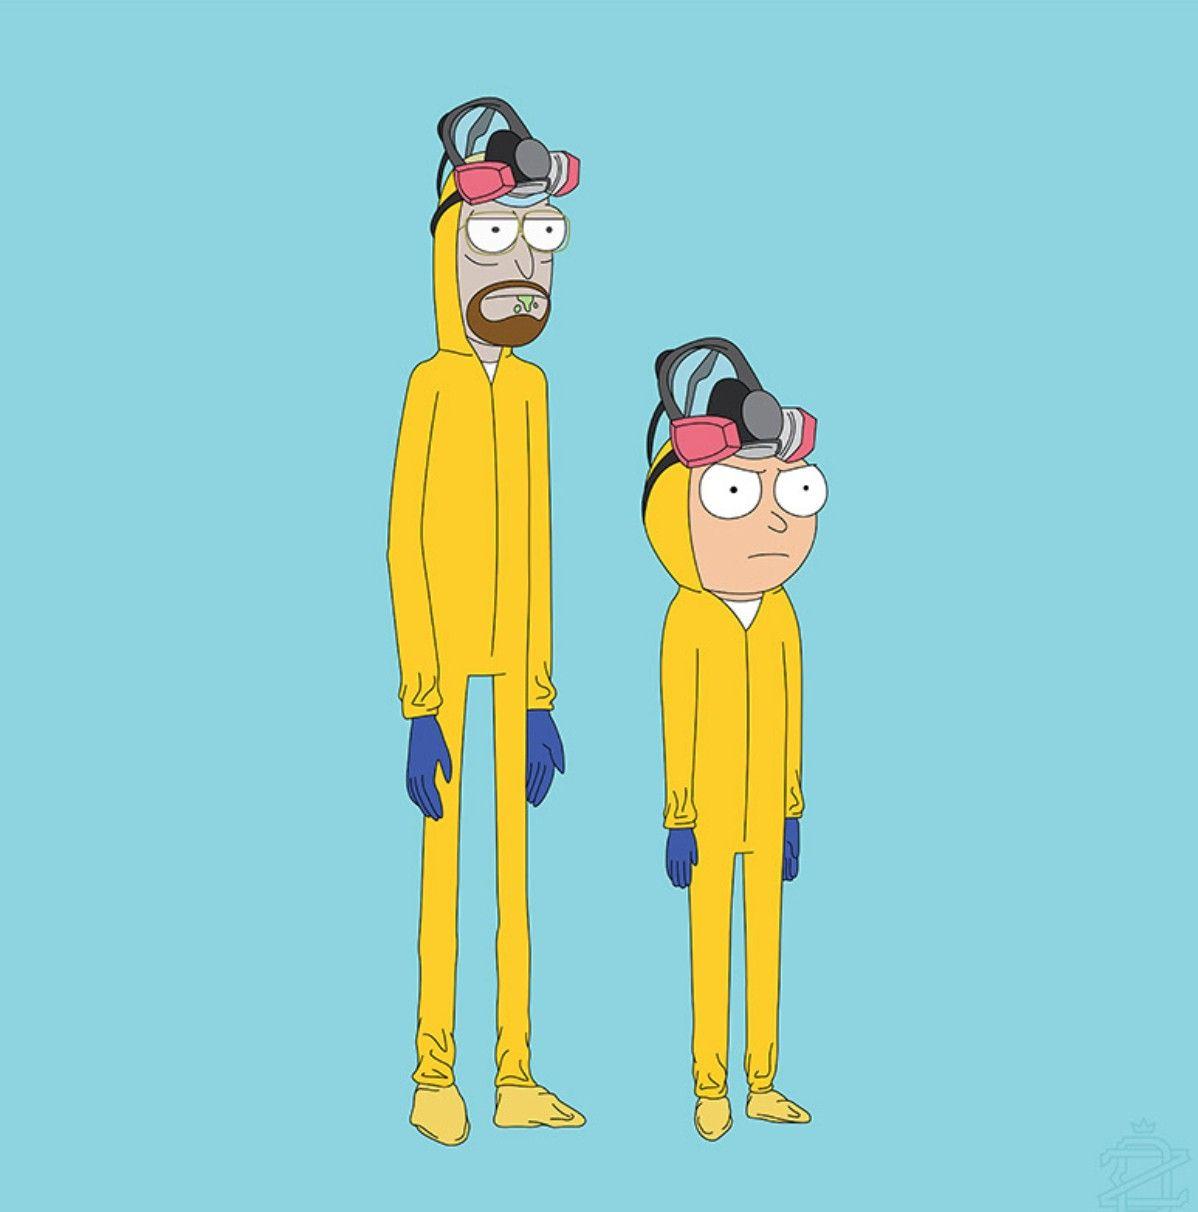 Rick and Morty x Breaking Bad Wallpaper - 9GAG